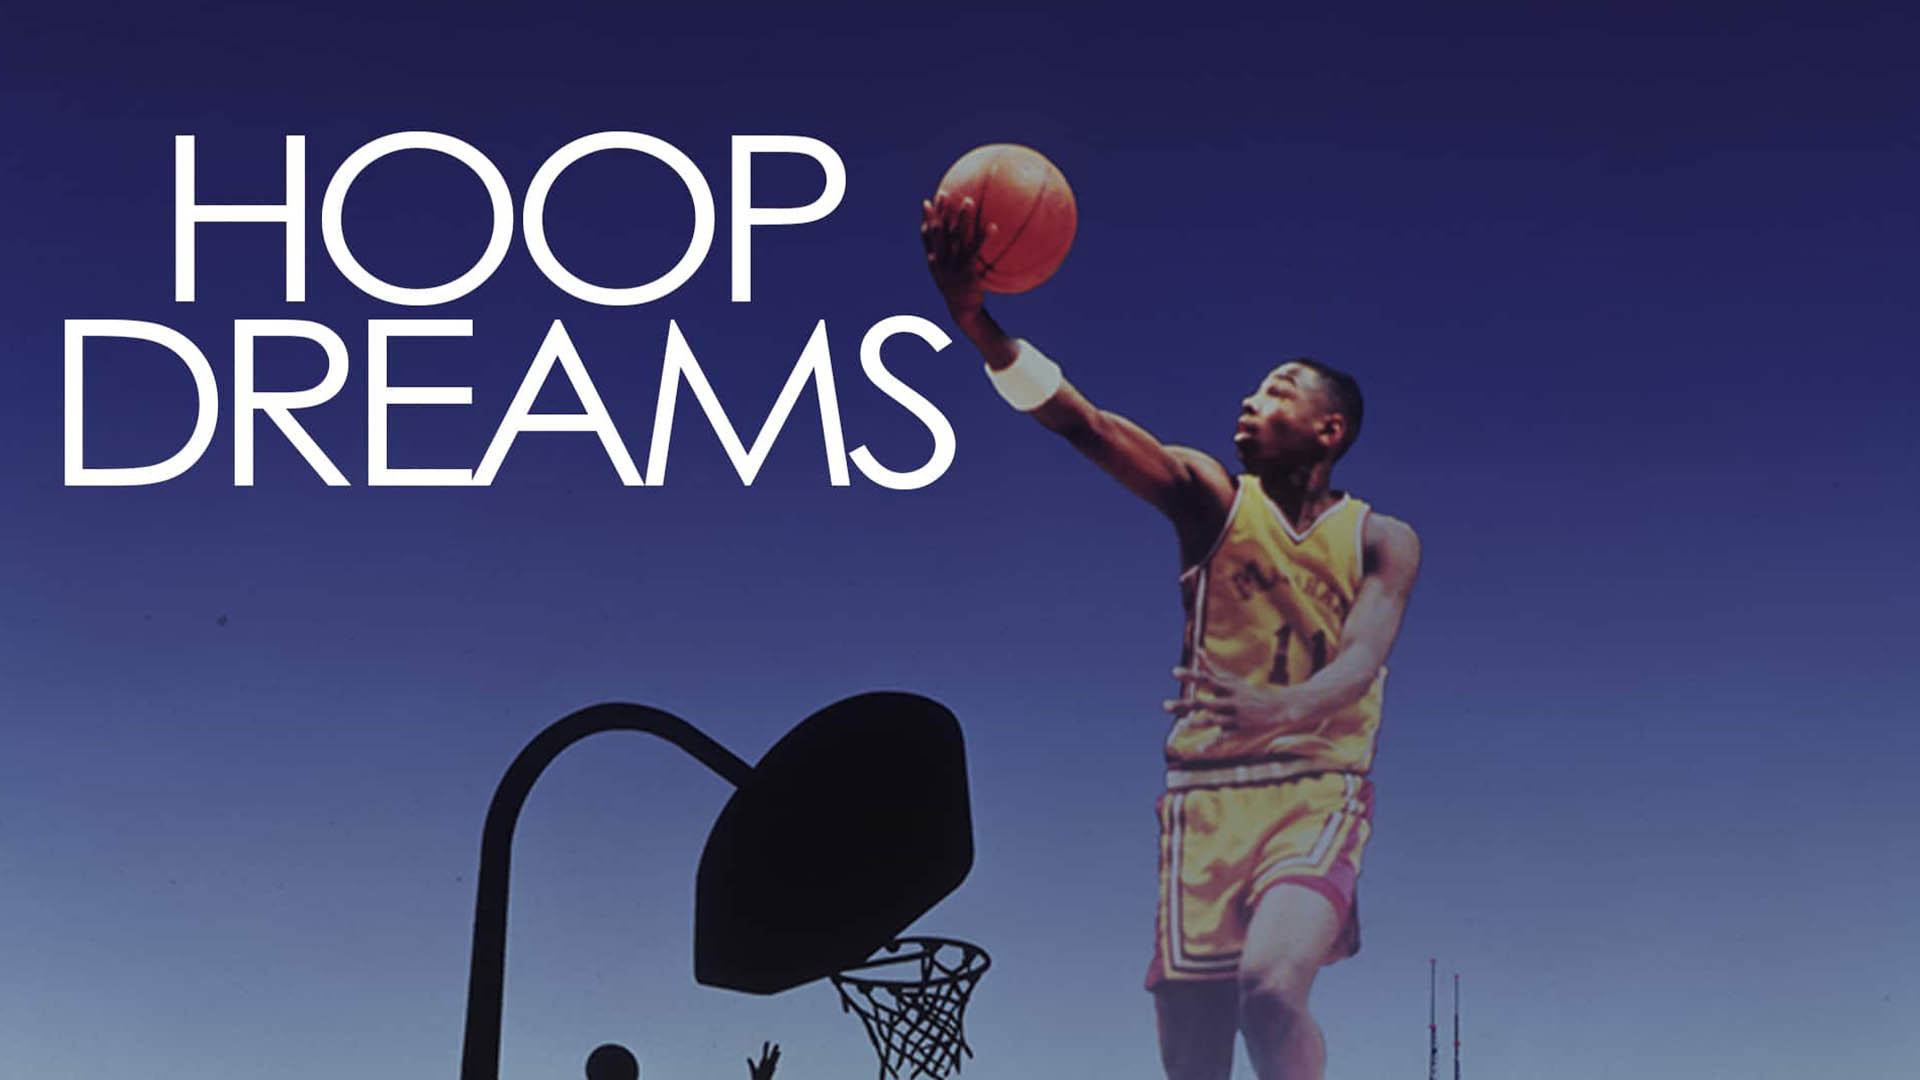 Hoop Dreams movie cover featuring William Gates playing basketball